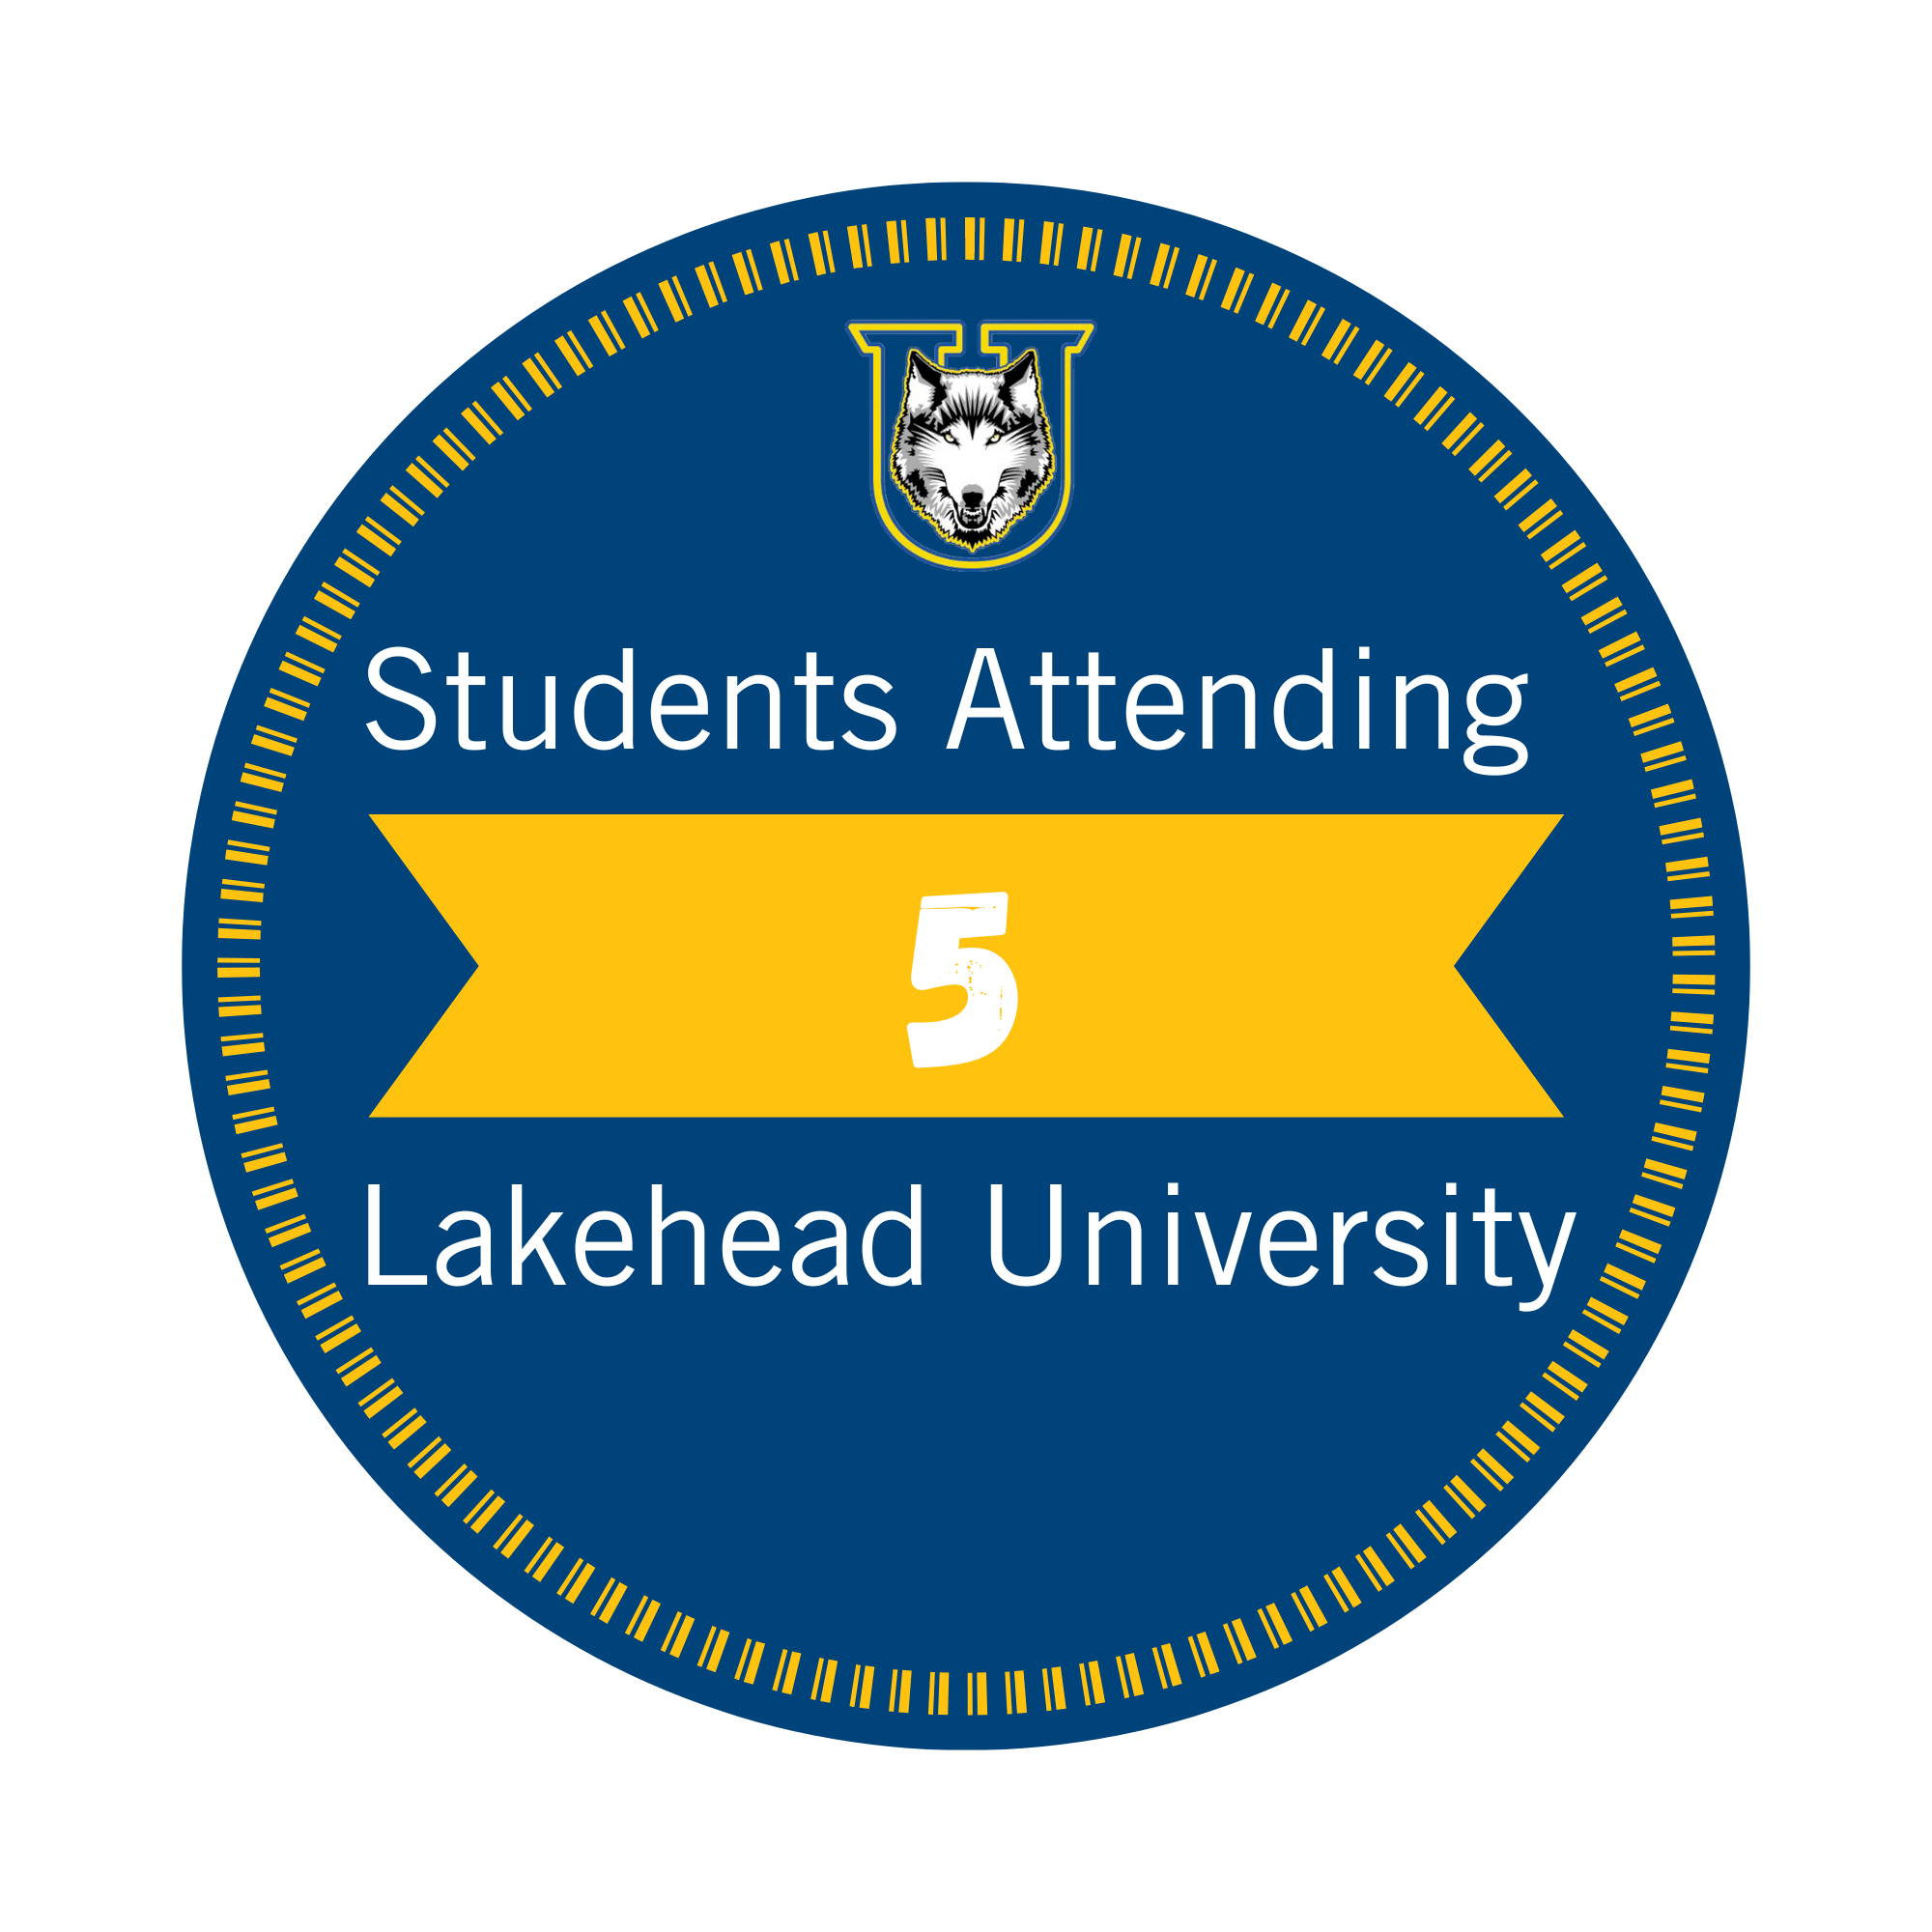 5 students attending Lakehead